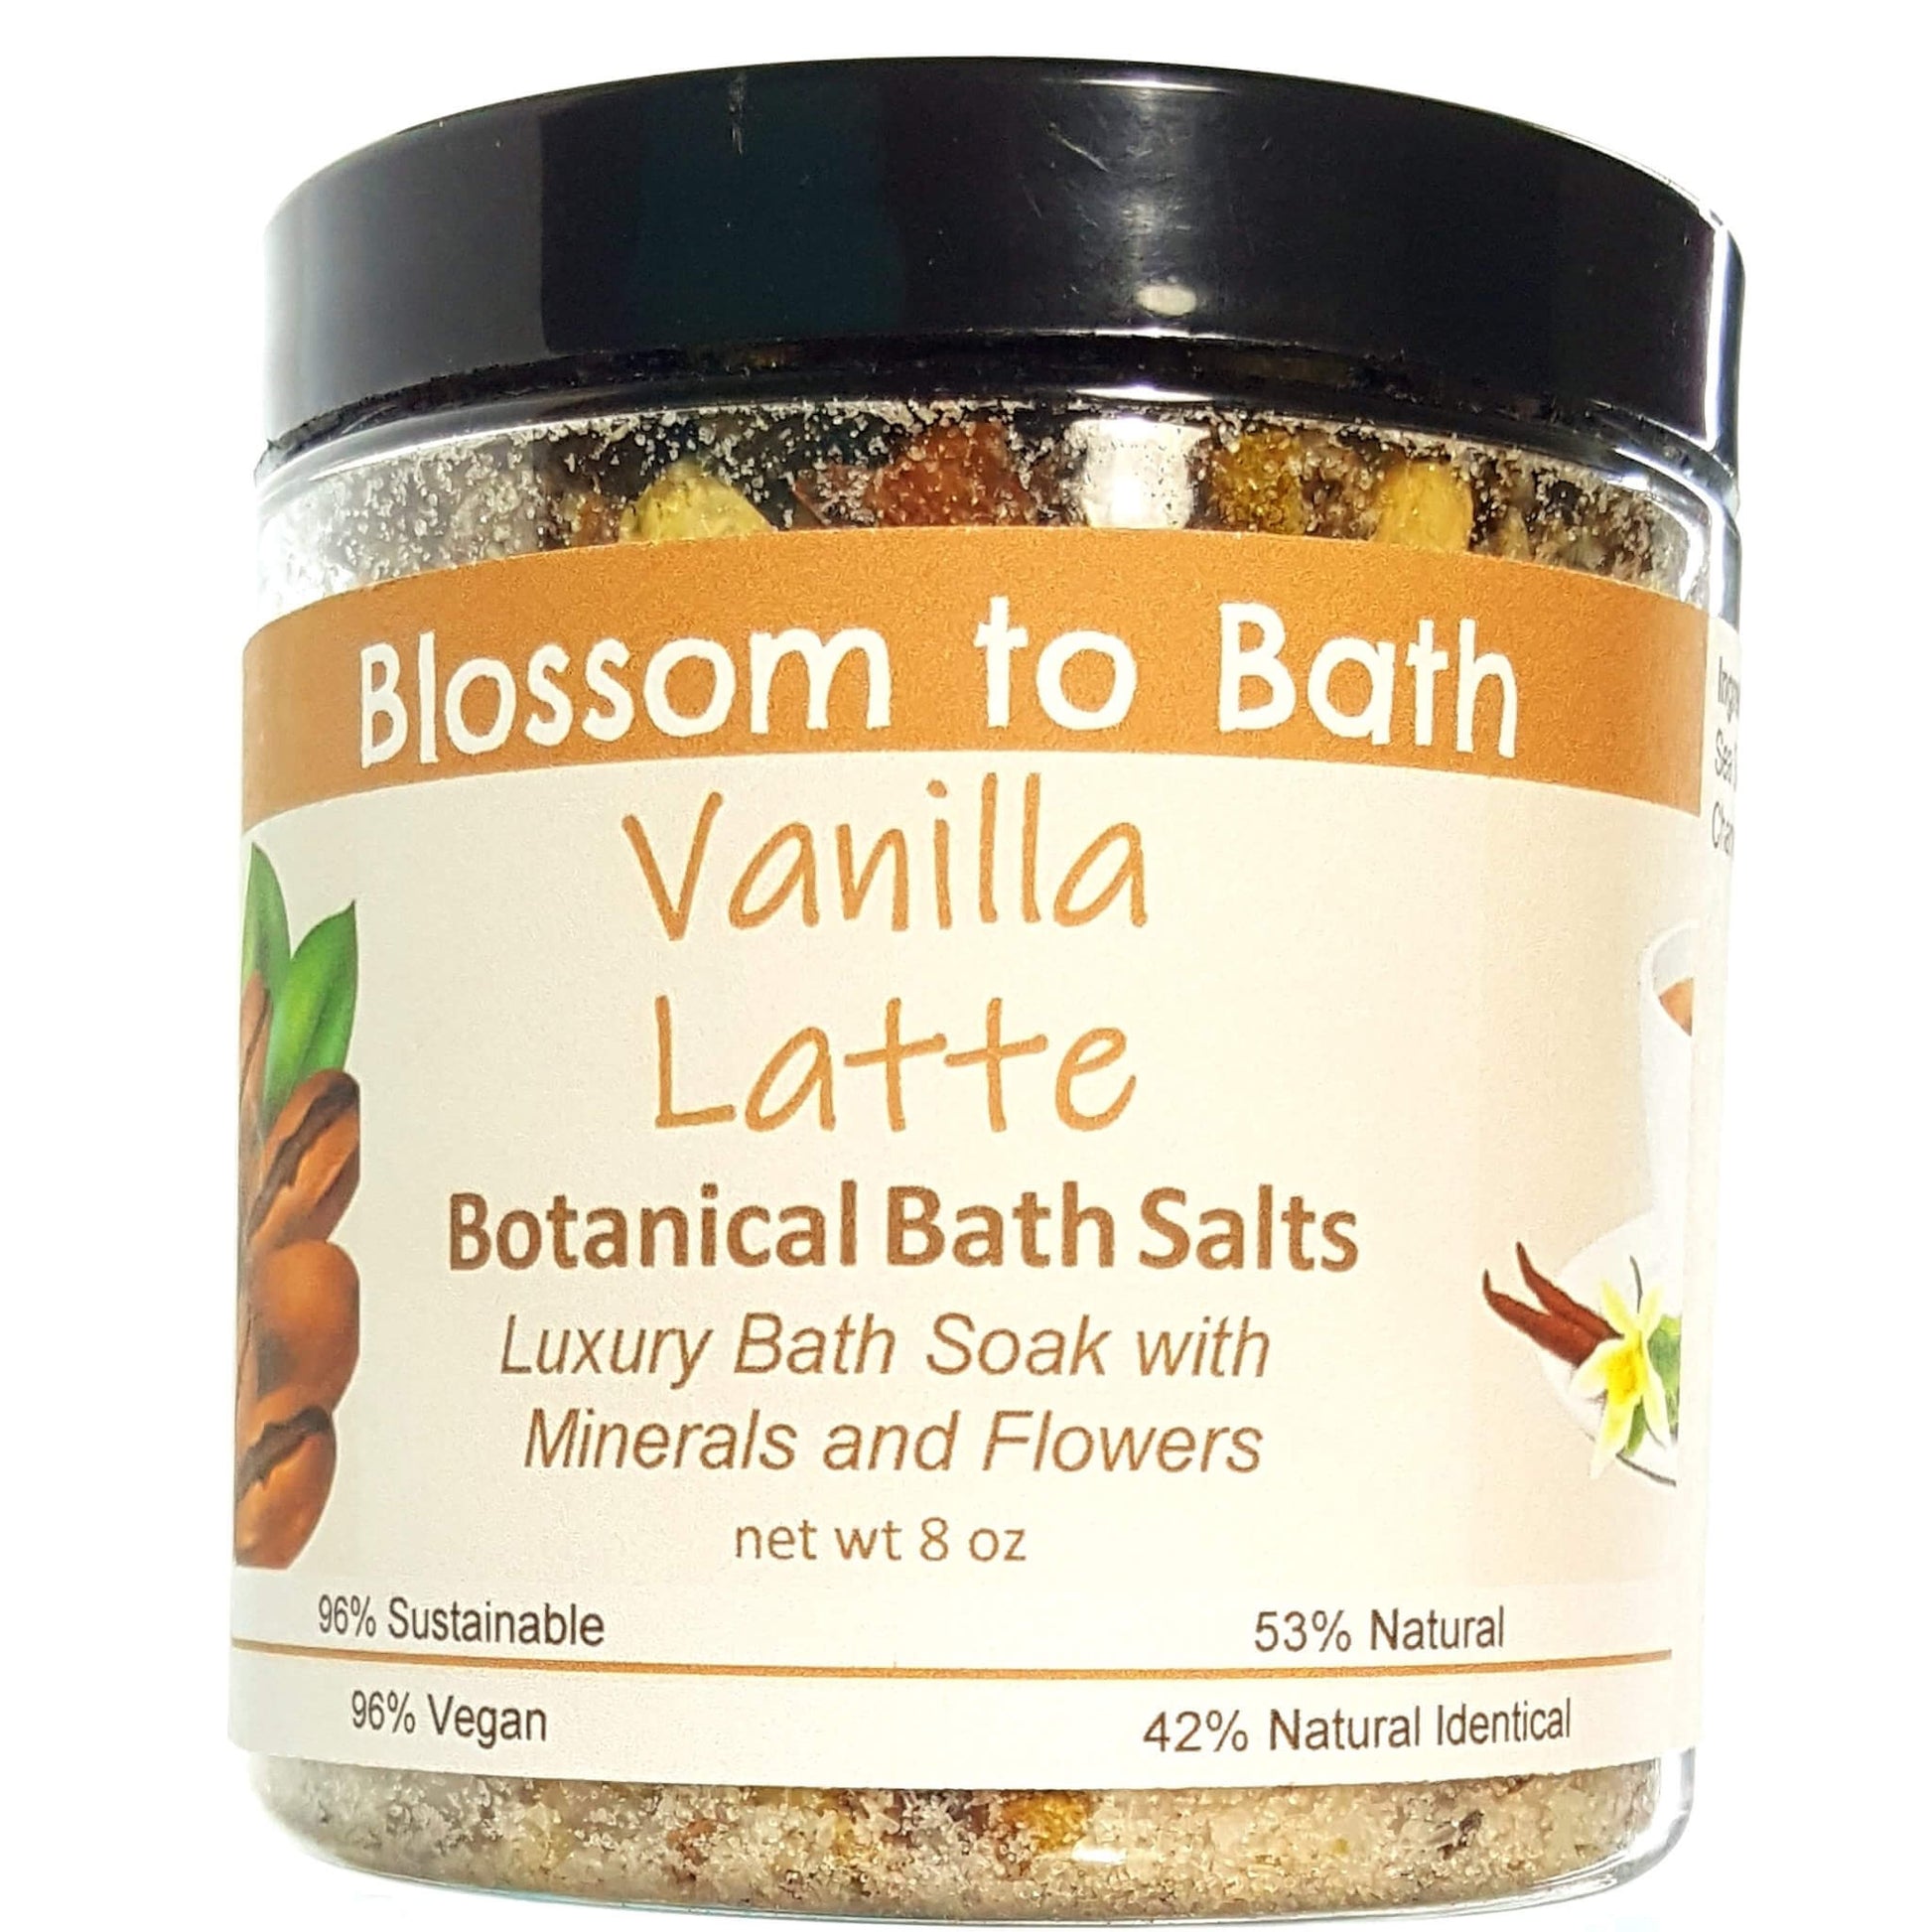 Buy Blossom to Bath Vanilla Latte Botanical Bath Salts from Flowersong Soap Studio.  A hand selected variety of skin loving botanicals and mineral rich salts for a unique, luxurious soaking experience  Sweetened vanilla combines with rich coffee to form the classic latte scent.